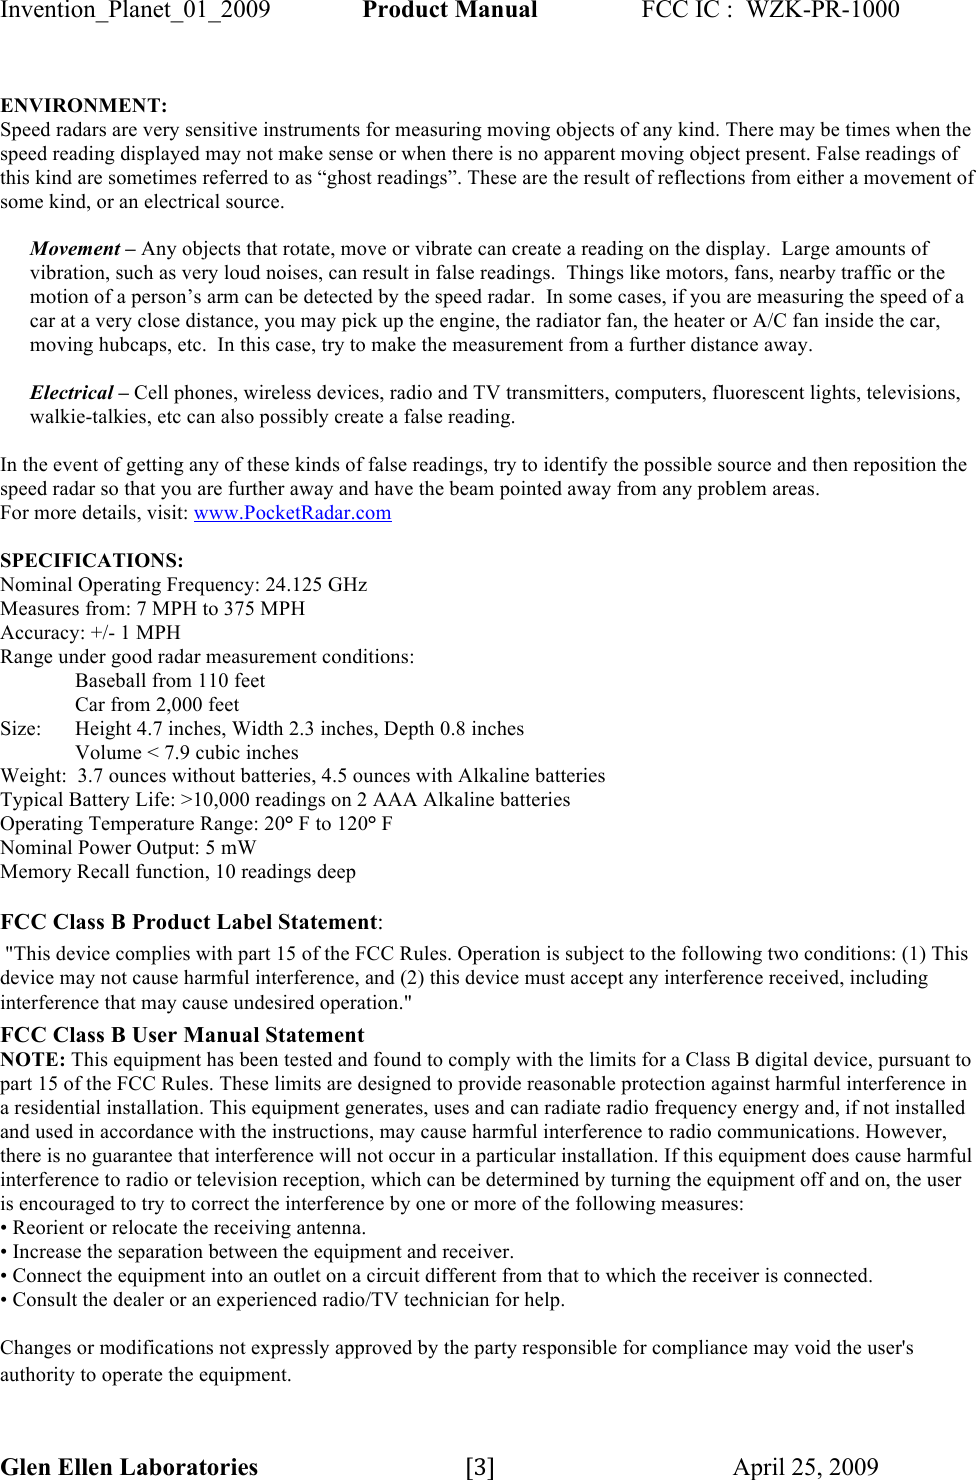 Invention_Planet_01_2009  Product Manual  FCC IC :  WZK-PR-1000 Glen Ellen Laboratories                                 [3]$$$$$$$$$$$$$$$$$$$$$$$$$$$$$$$$$$$$$$$$$$$April 25, 2009$ ENVIRONMENT: Speed radars are very sensitive instruments for measuring moving objects of any kind. There may be times when the speed reading displayed may not make sense or when there is no apparent moving object present. False readings of this kind are sometimes referred to as “ghost readings”. These are the result of reflections from either a movement of some kind, or an electrical source.  Movement – Any objects that rotate, move or vibrate can create a reading on the display.  Large amounts of vibration, such as very loud noises, can result in false readings.  Things like motors, fans, nearby traffic or the motion of a person’s arm can be detected by the speed radar.  In some cases, if you are measuring the speed of a car at a very close distance, you may pick up the engine, the radiator fan, the heater or A/C fan inside the car, moving hubcaps, etc.  In this case, try to make the measurement from a further distance away.              Electrical – Cell phones, wireless devices, radio and TV transmitters, computers, fluorescent lights, televisions, walkie-talkies, etc can also possibly create a false reading.   In the event of getting any of these kinds of false readings, try to identify the possible source and then reposition the speed radar so that you are further away and have the beam pointed away from any problem areas. For more details, visit: www.PocketRadar.com  SPECIFICATIONS: Nominal Operating Frequency: 24.125 GHz Measures from: 7 MPH to 375 MPH Accuracy: +/- 1 MPH Range under good radar measurement conditions:   Baseball from 110 feet Car from 2,000 feet Size:  Height 4.7 inches, Width 2.3 inches, Depth 0.8 inches Volume &lt; 7.9 cubic inches Weight:  3.7 ounces without batteries, 4.5 ounces with Alkaline batteries Typical Battery Life: &gt;10,000 readings on 2 AAA Alkaline batteries Operating Temperature Range: 20° F to 120° F Nominal Power Output: 5 mW   Memory Recall function, 10 readings deep  FCC Class B Product Label Statement:  &quot;This device complies with part 15 of the FCC Rules. Operation is subject to the following two conditions: (1) This device may not cause harmful interference, and (2) this device must accept any interference received, including interference that may cause undesired operation.&quot; FCC Class B User Manual Statement NOTE: This equipment has been tested and found to comply with the limits for a Class B digital device, pursuant to part 15 of the FCC Rules. These limits are designed to provide reasonable protection against harmful interference in a residential installation. This equipment generates, uses and can radiate radio frequency energy and, if not installed and used in accordance with the instructions, may cause harmful interference to radio communications. However, there is no guarantee that interference will not occur in a particular installation. If this equipment does cause harmful interference to radio or television reception, which can be determined by turning the equipment off and on, the user is encouraged to try to correct the interference by one or more of the following measures: • Reorient or relocate the receiving antenna. • Increase the separation between the equipment and receiver. • Connect the equipment into an outlet on a circuit different from that to which the receiver is connected. • Consult the dealer or an experienced radio/TV technician for help.  Changes or modifications not expressly approved by the party responsible for compliance may void the user&apos;s authority to operate the equipment. 